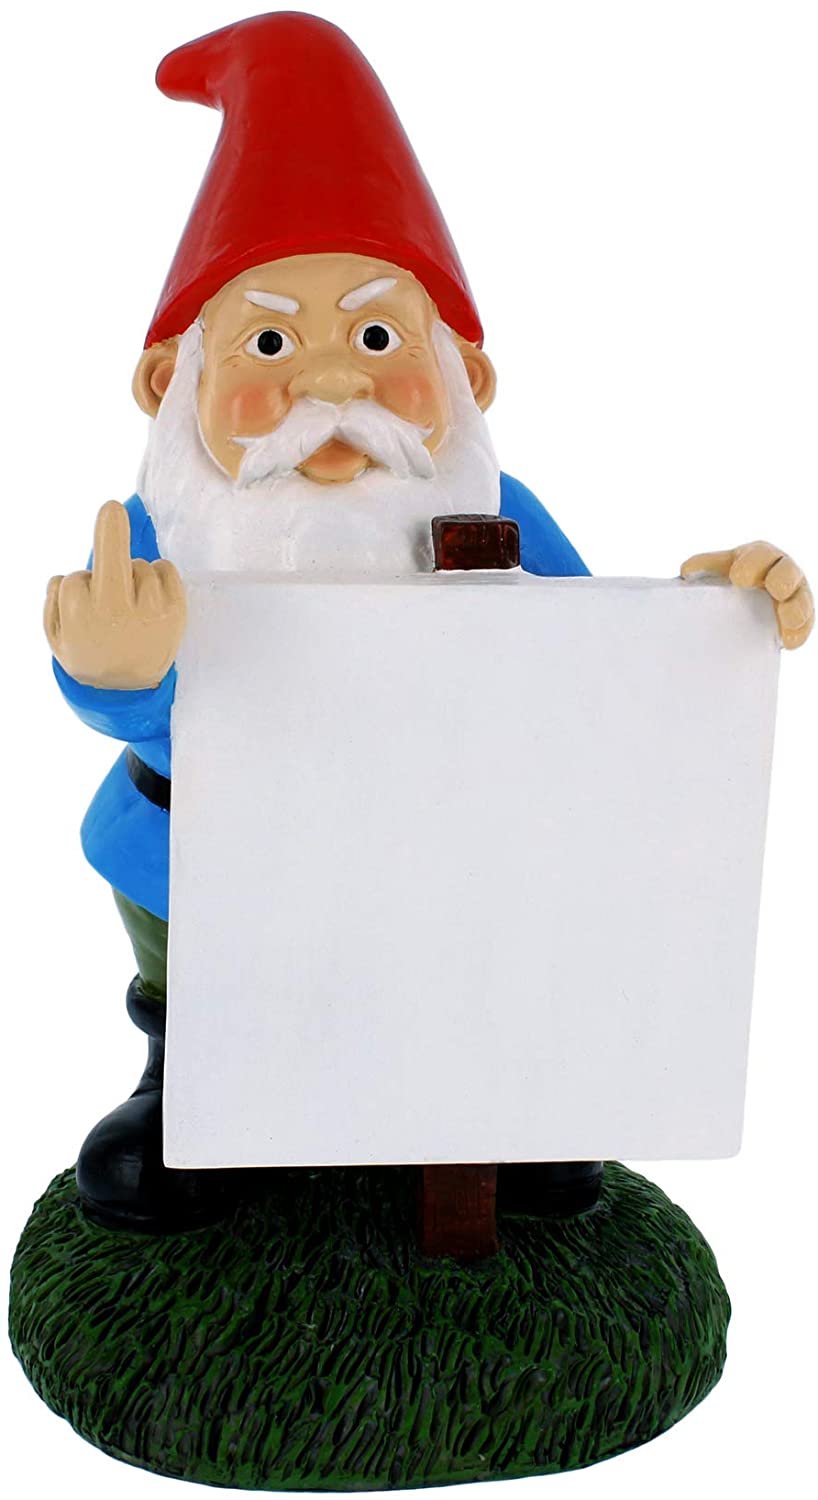 Gnometastic Middle Finger Gnome with Customizable Protest Sign, 9" Inches - Funny Sticky Note Holder and Indoor/Outdoor Lawn Gnome Garden Statue